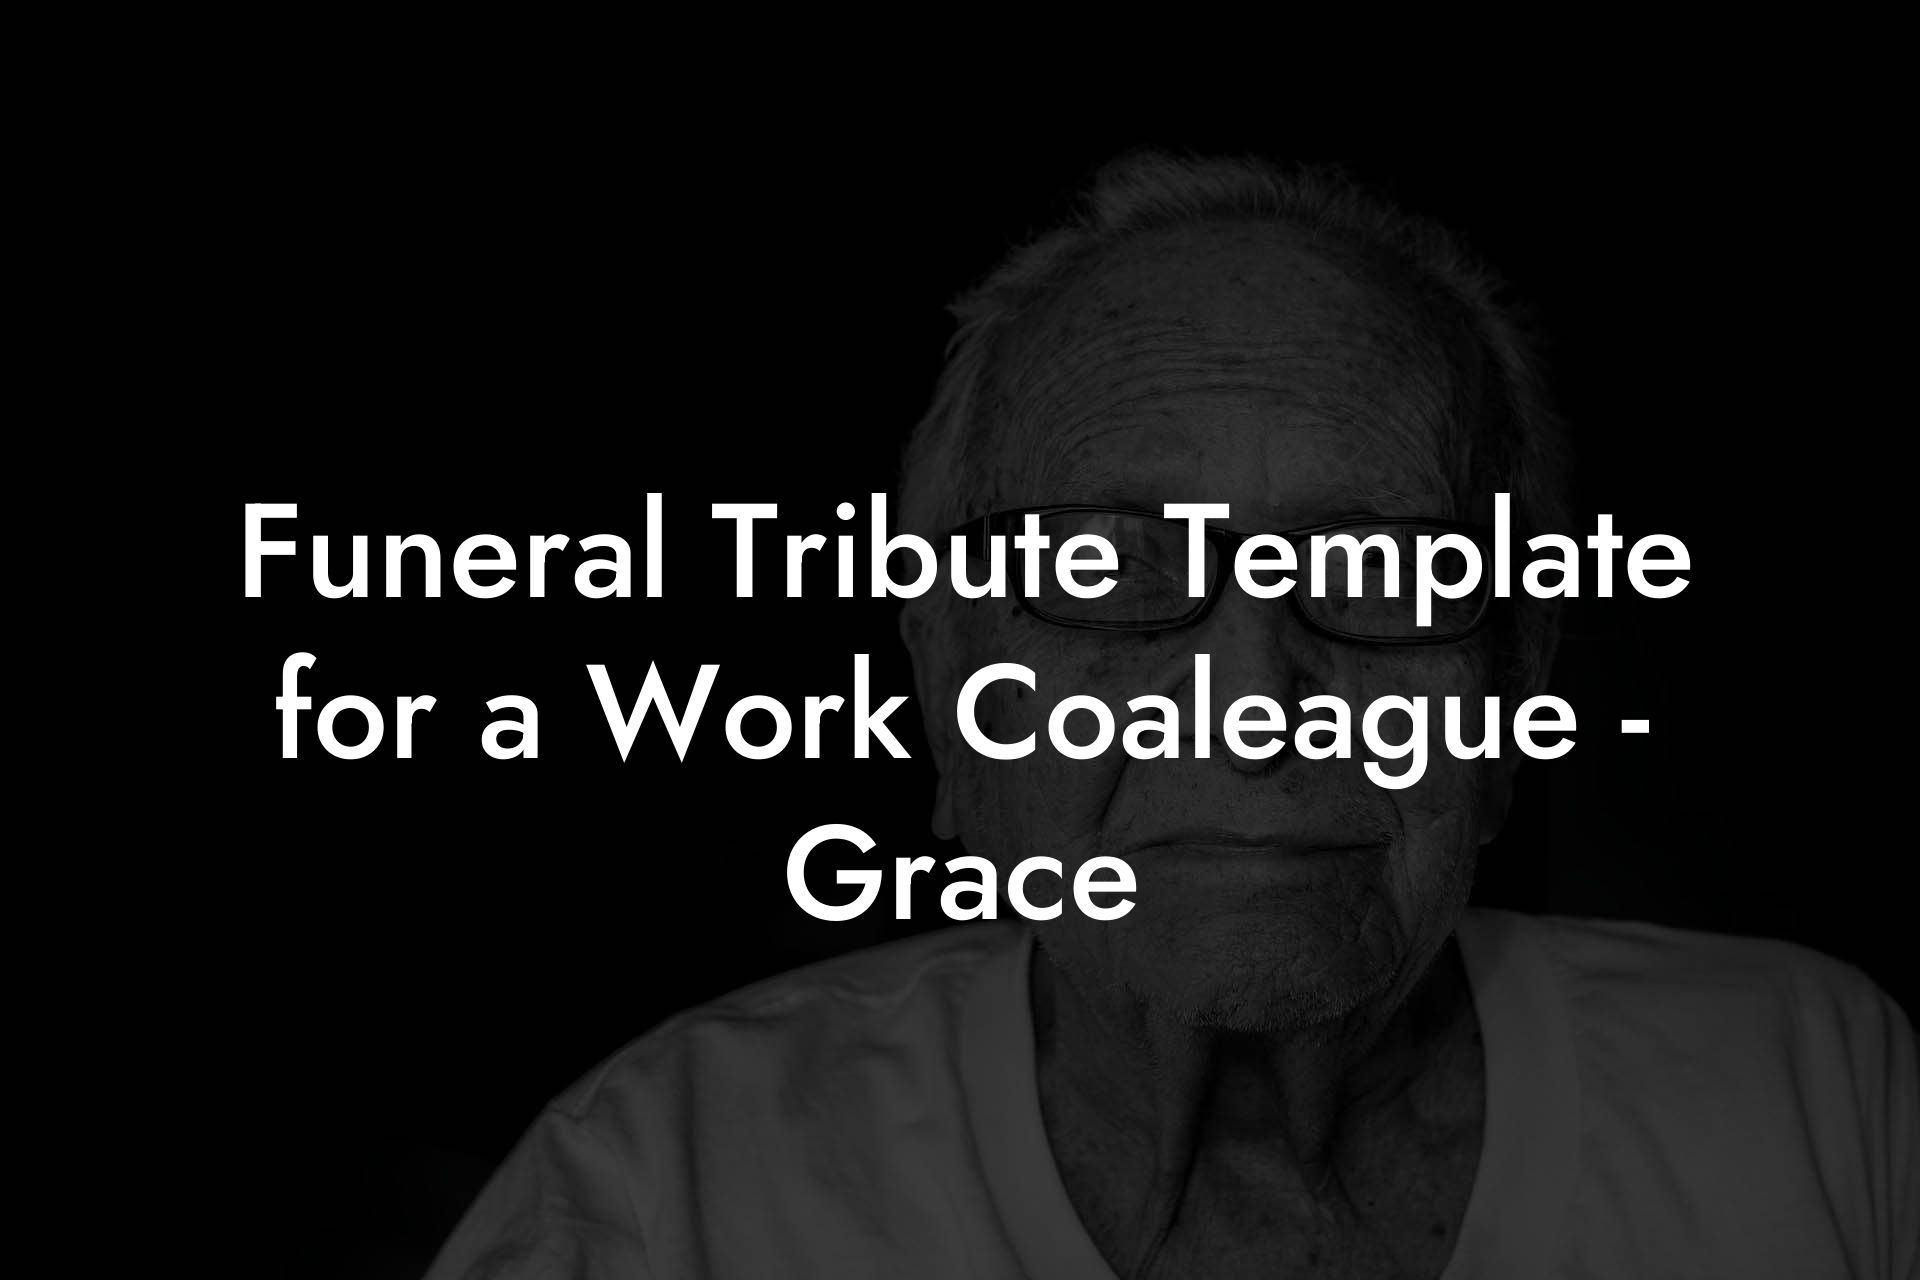 Funeral Tribute Template for a Work Coaleague - Grace